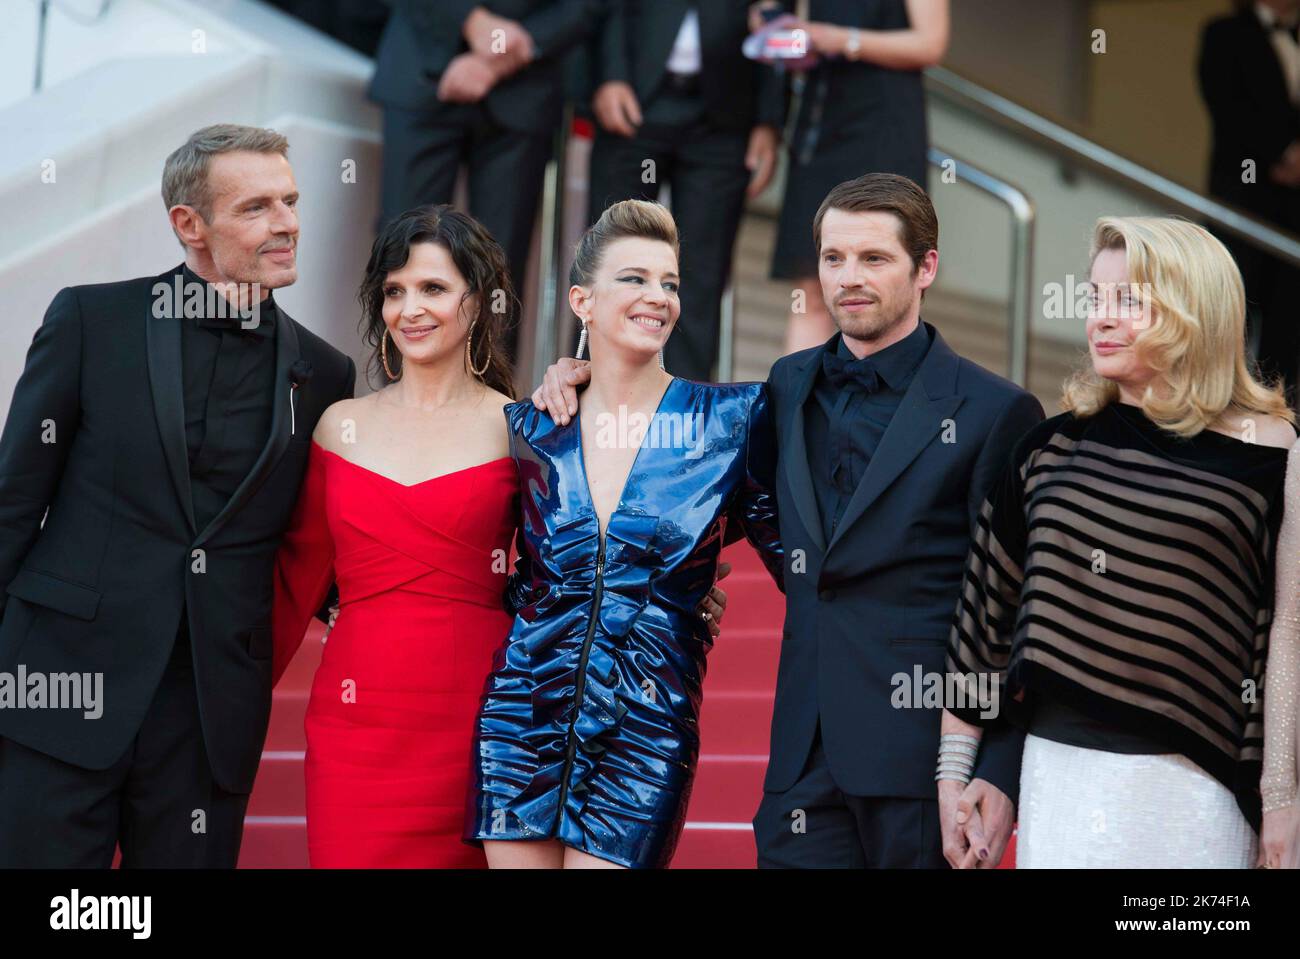 Catherine Deneuve, Juliette Binoche, and Lambert Wilson attend the 'The Killing Of A Sacred Deer' screening during the 70th annual Cannes Film Festival at Palais des Festivals  Stock Photo